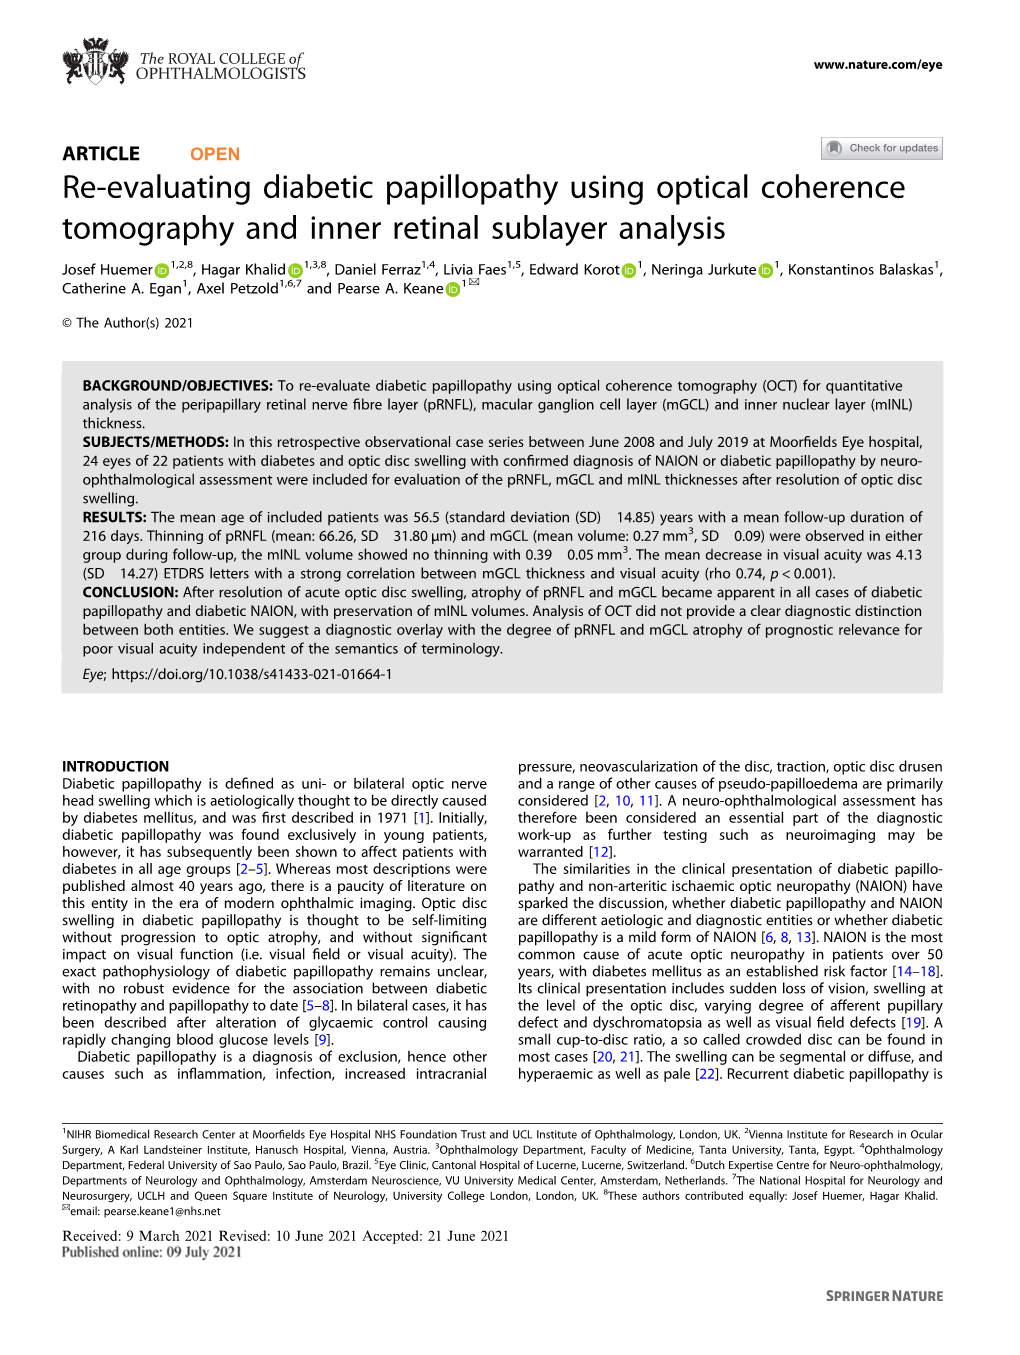 Re-Evaluating Diabetic Papillopathy Using Optical Coherence Tomography and Inner Retinal Sublayer Analysis